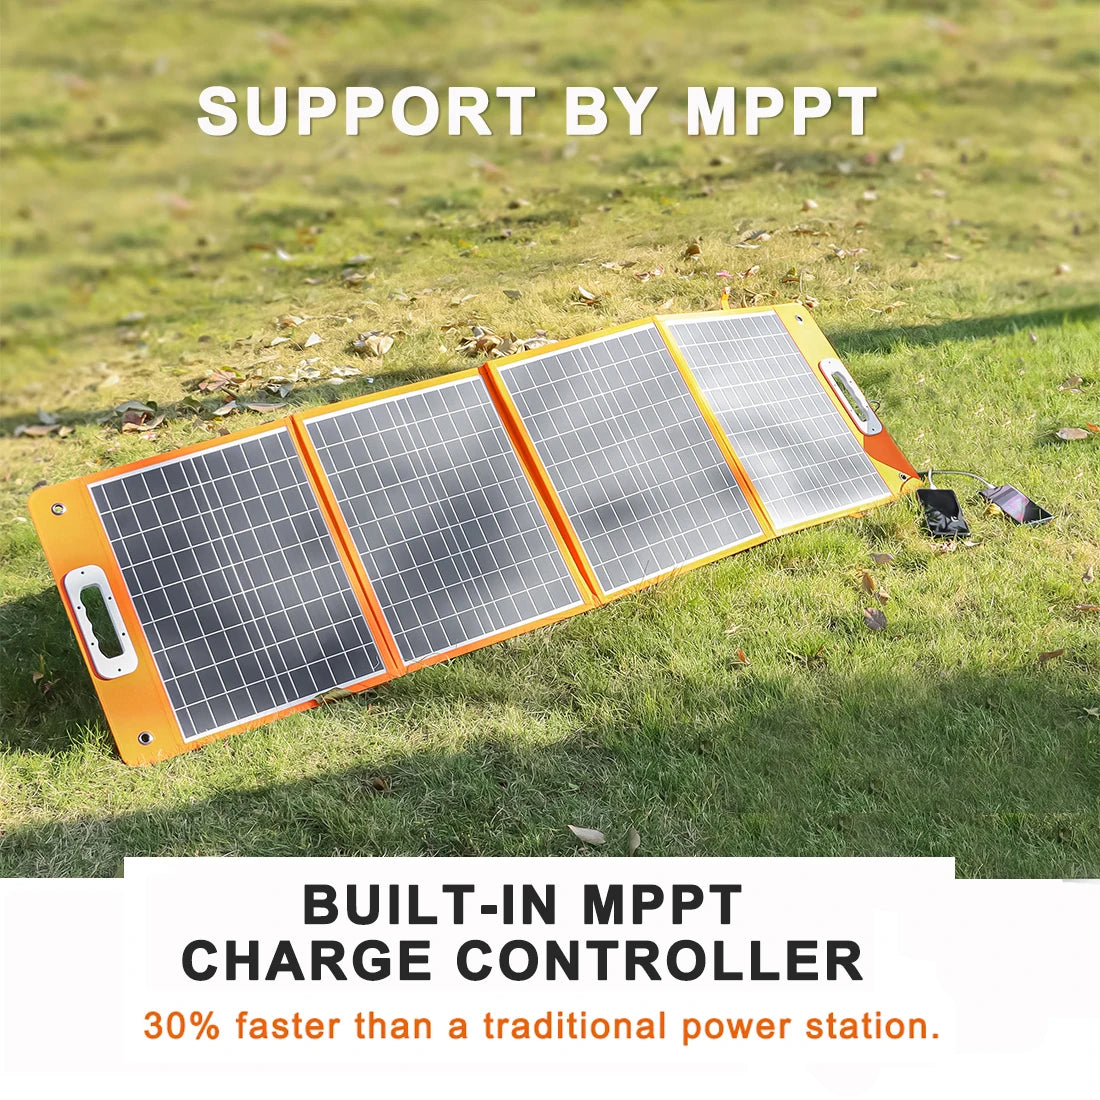 FlashFish Solar Panel, Fast charging solar panel with MPPT controller charges up to 30% quicker.